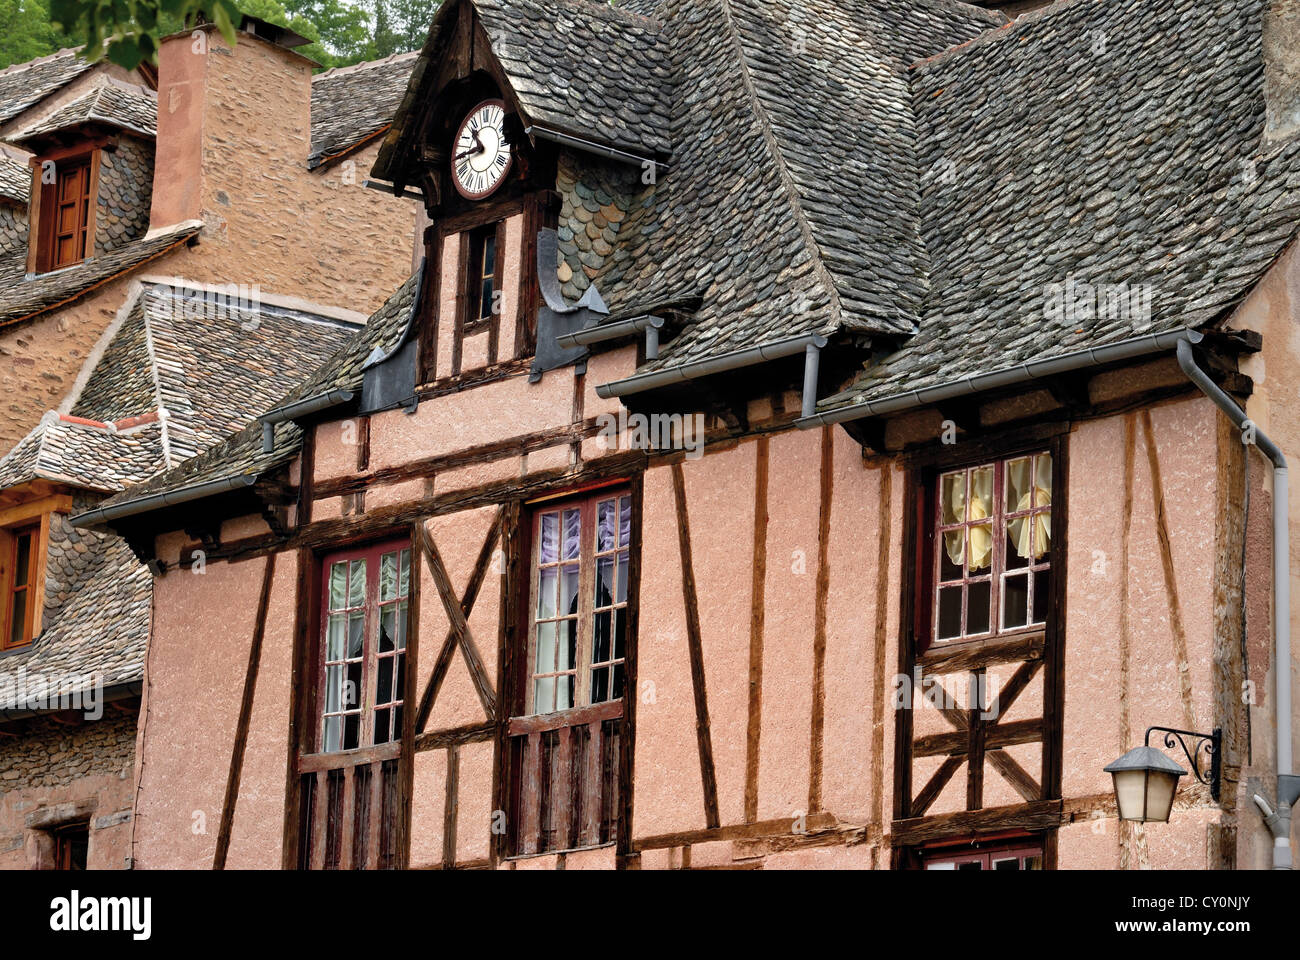 France, St. James Way: Medieval half-timbered houses in historic village Conques Stock Photo